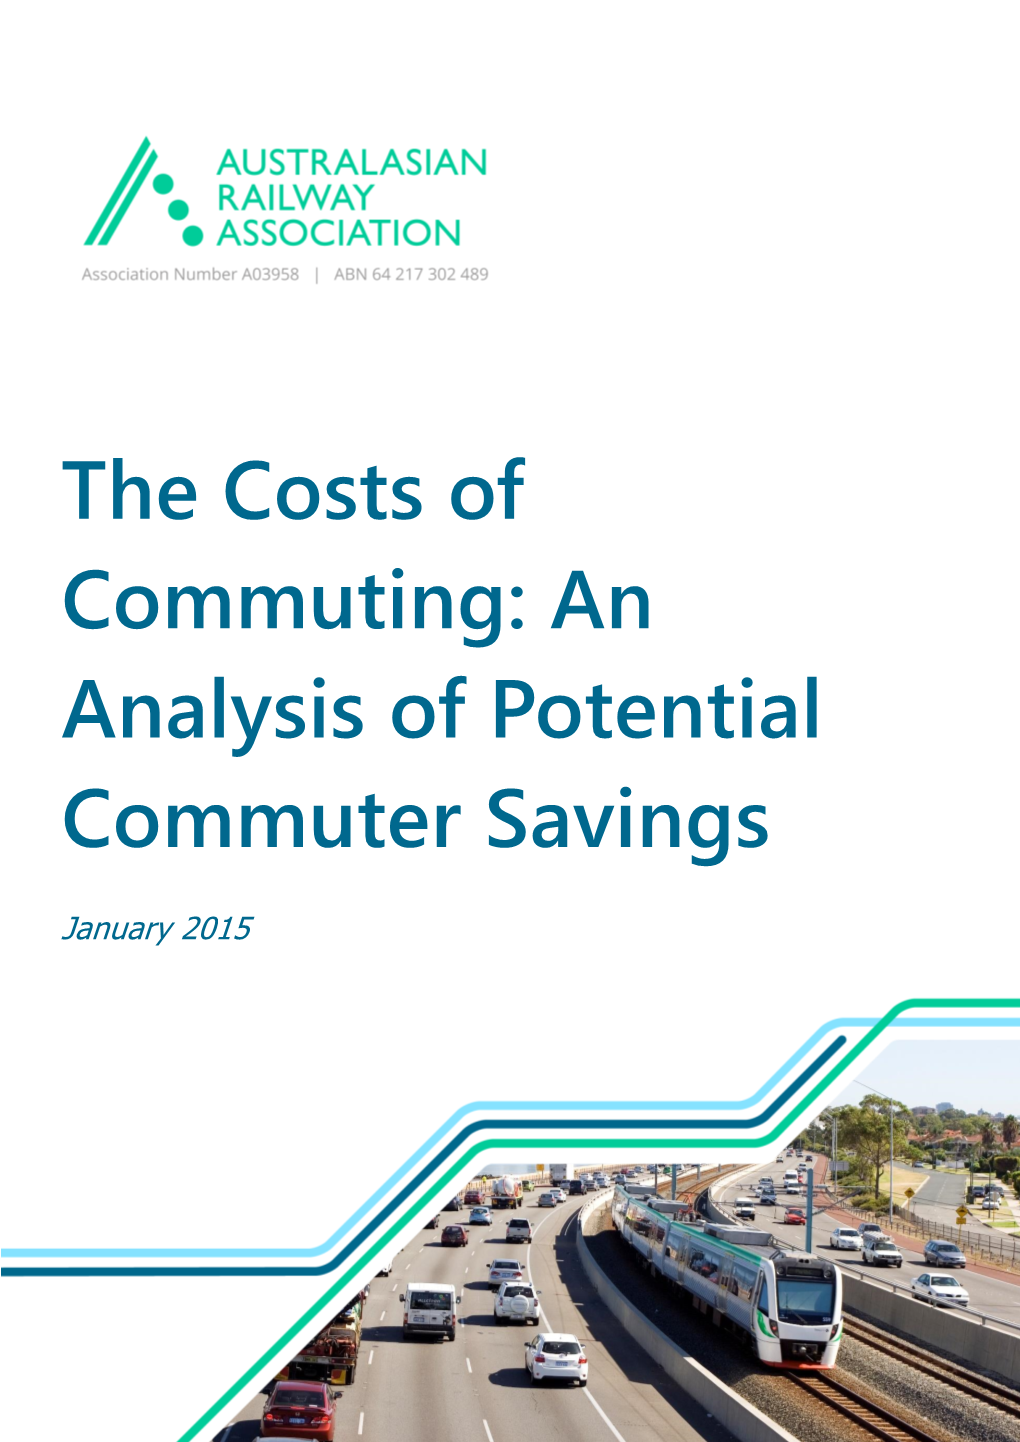 An Analysis of Potential Commuter Savings